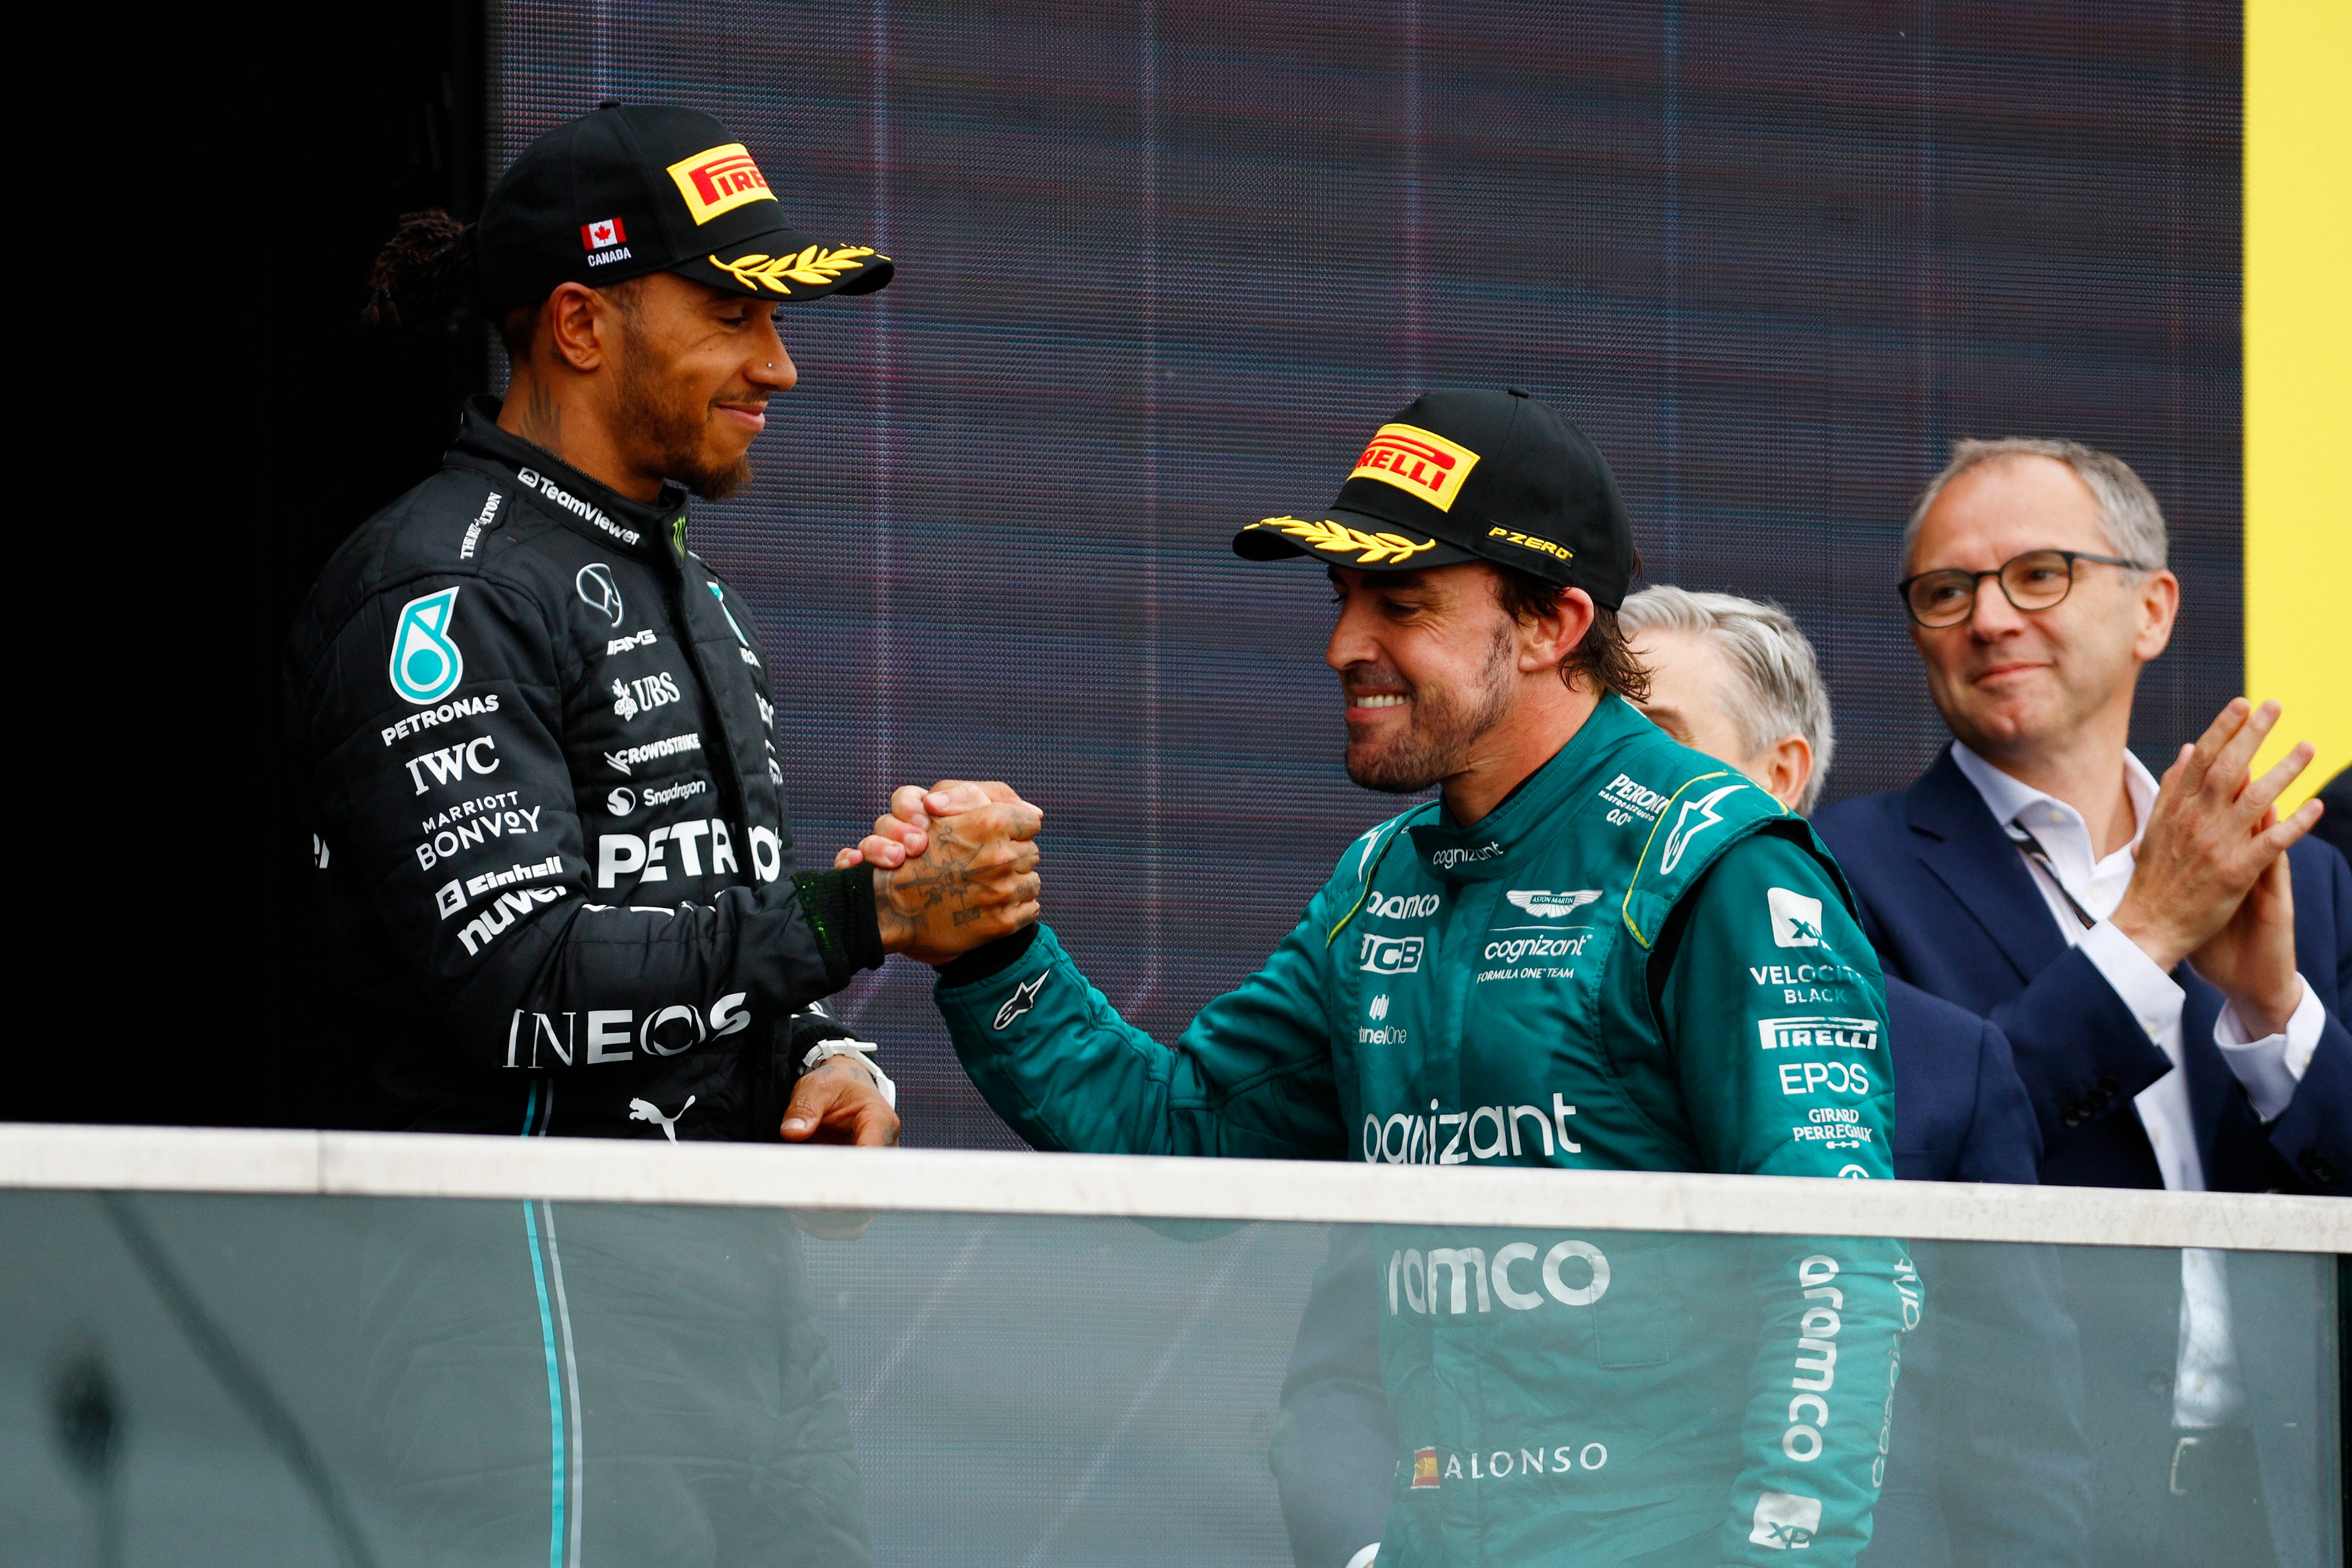 The new contract means Alonso will not replace Lewis Hamilton at Mercedes